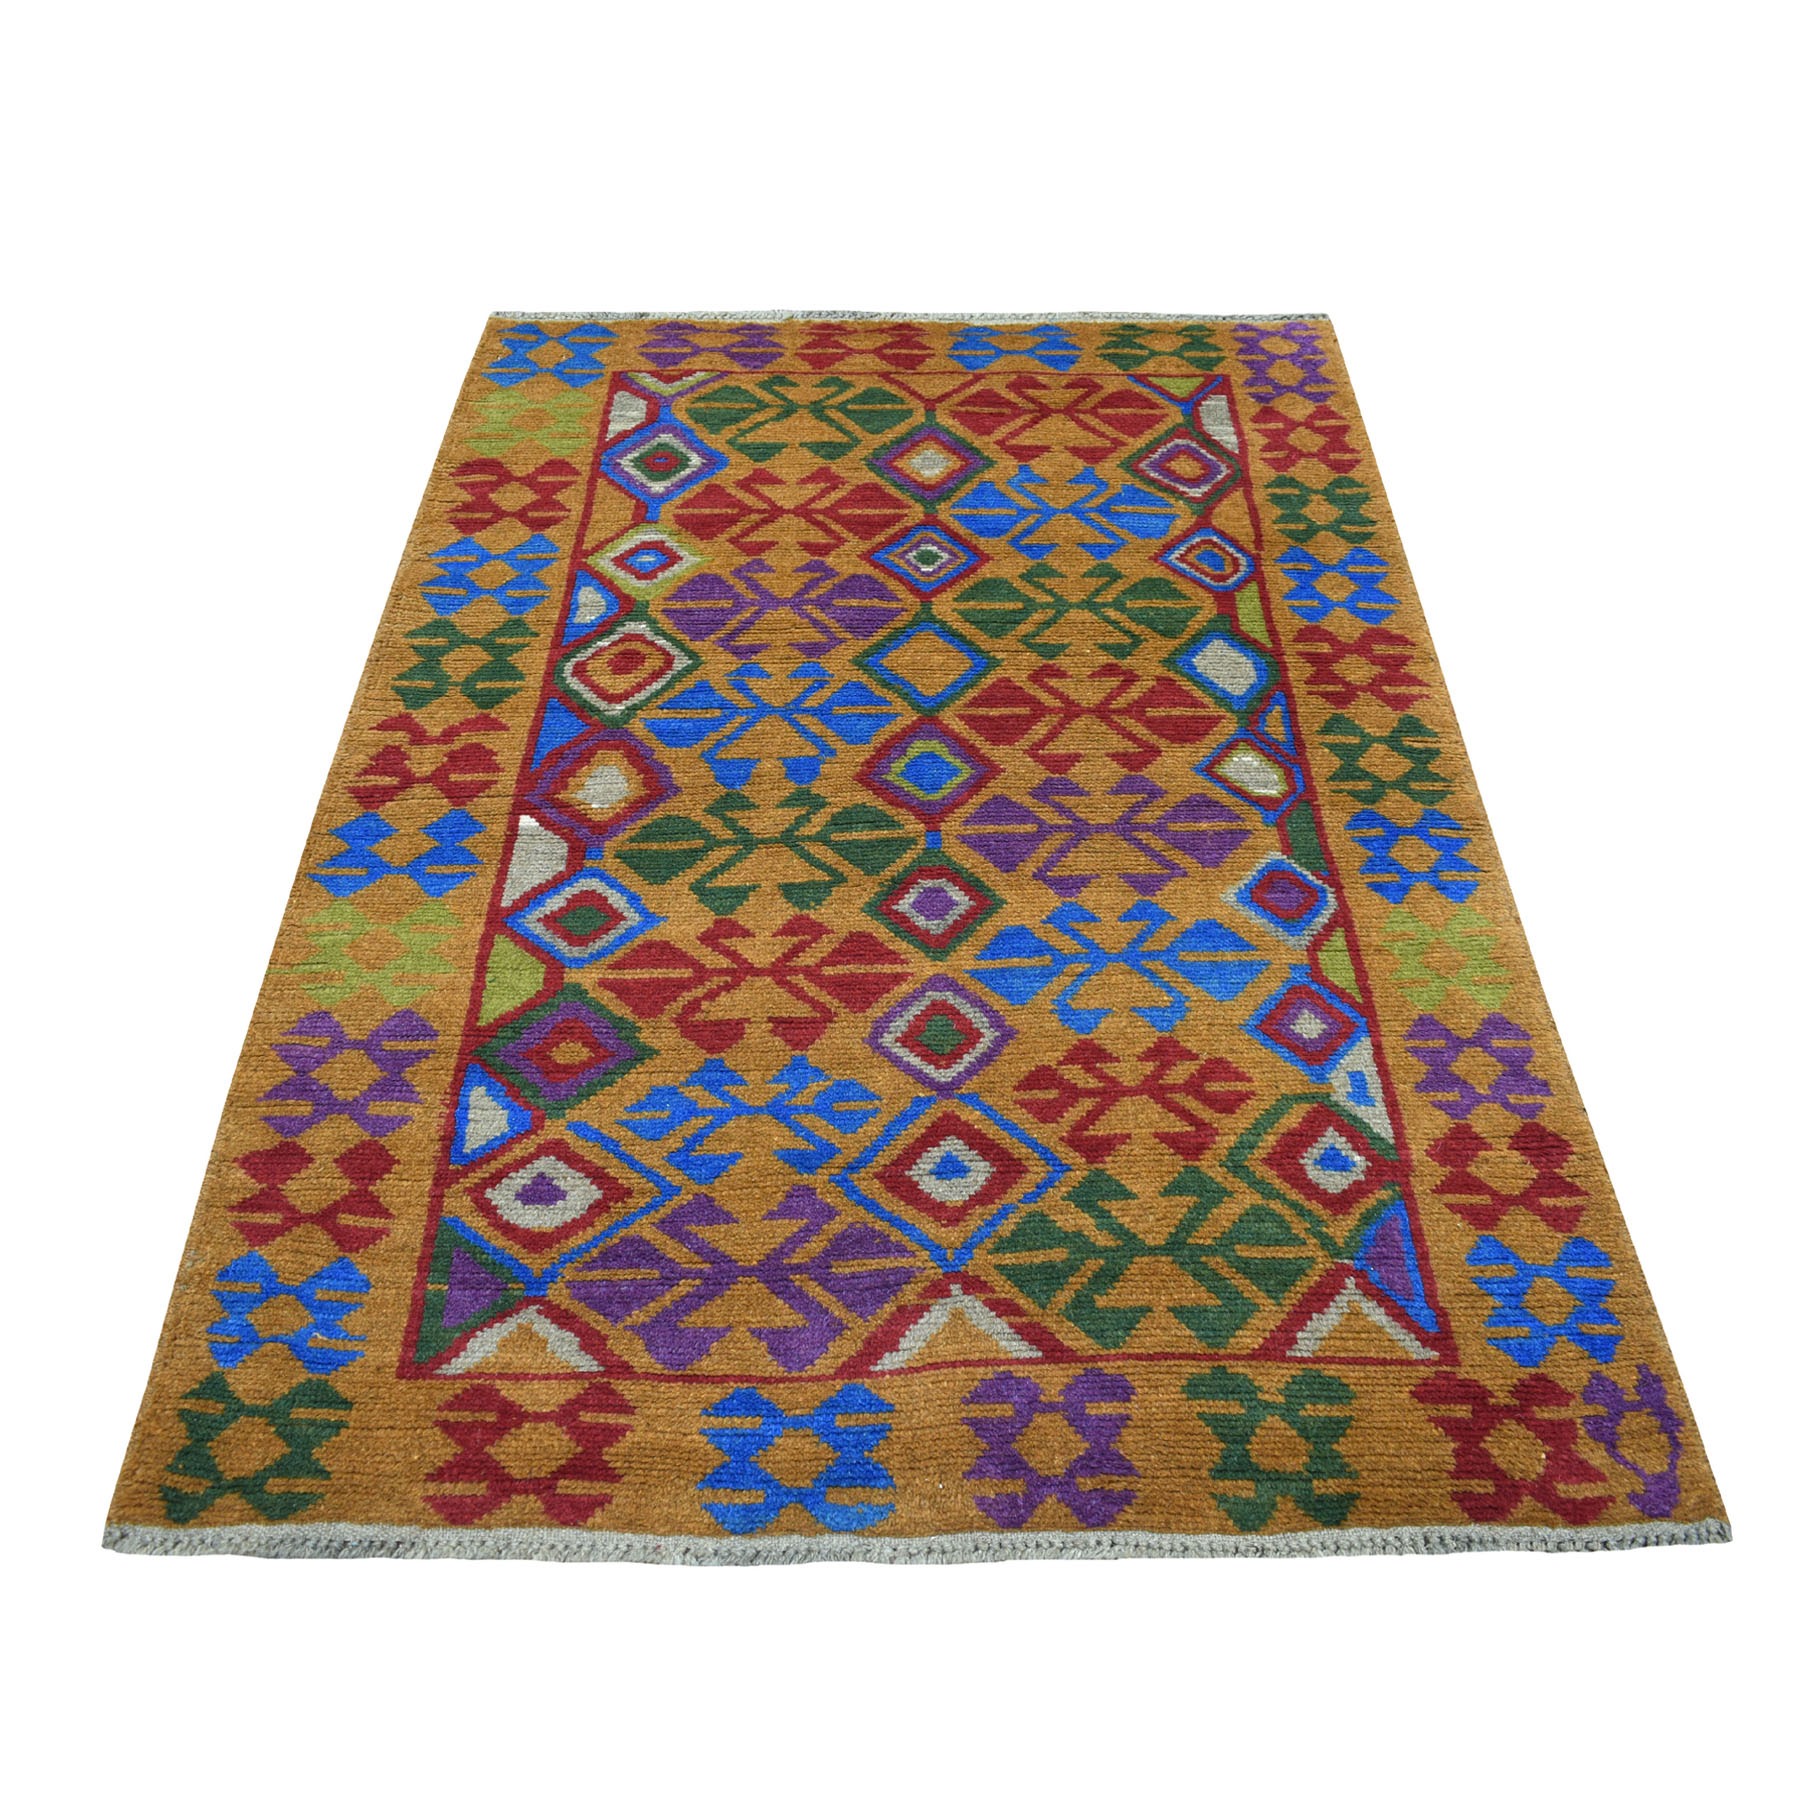 4'x6' Natural Dyes Colorful Afghan Baluch Tribal Design Hand Woven Pure Wool Oriental Rug 